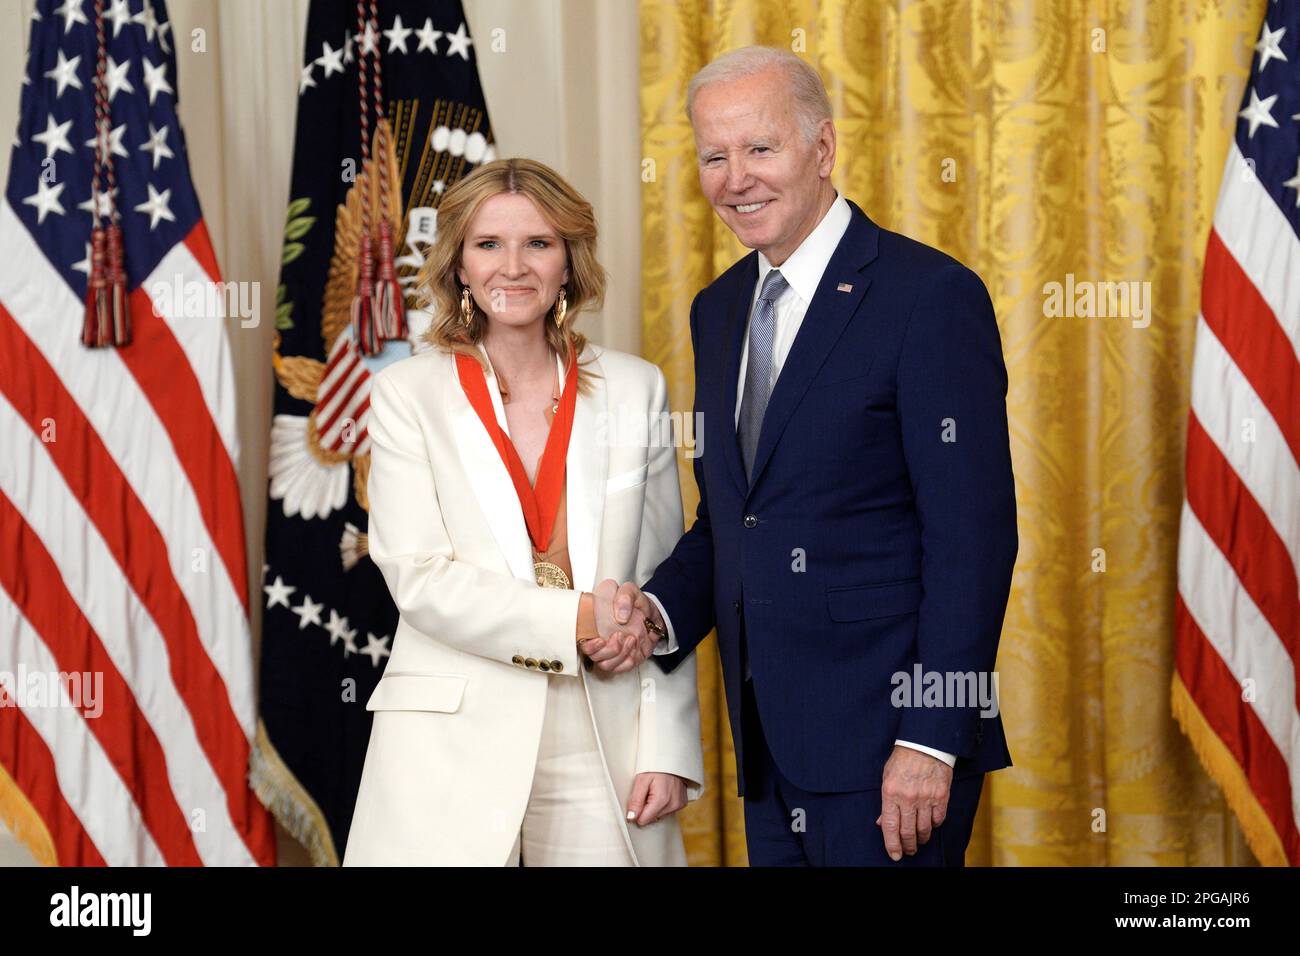 Washington, United States. 21st Mar, 2023. National Humanities Medal recipient author Tara Westover stands on stage with U.S. President Joe Biden during a ceremony in the East Room at the White House in Washington on March 21, 2023. Photo by Yuri Gripas/ABACAPRESS.COM Credit: Abaca Press/Alamy Live News Stock Photo